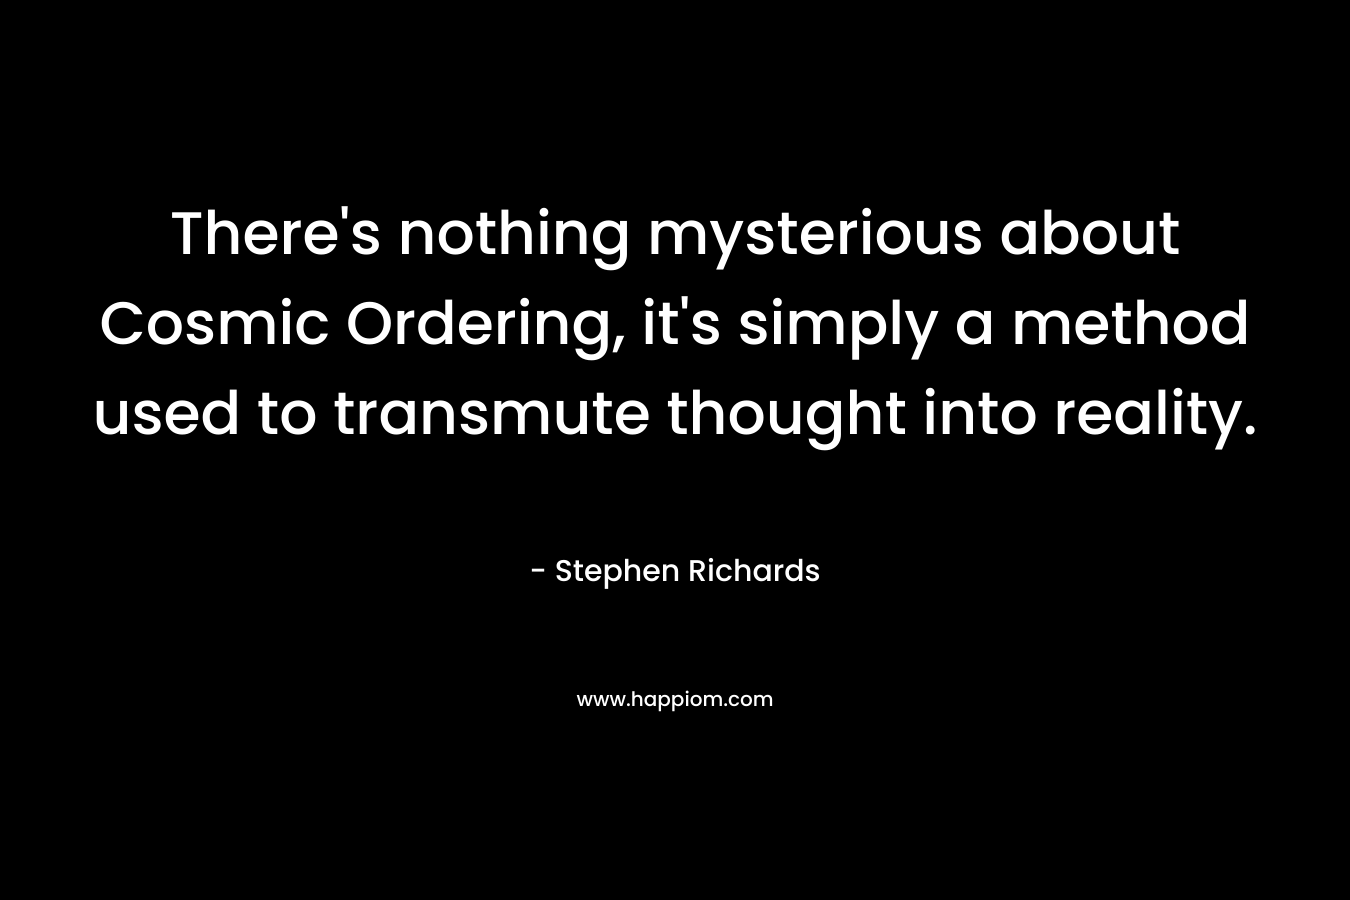 There’s nothing mysterious about Cosmic Ordering, it’s simply a method used to transmute thought into reality. – Stephen Richards